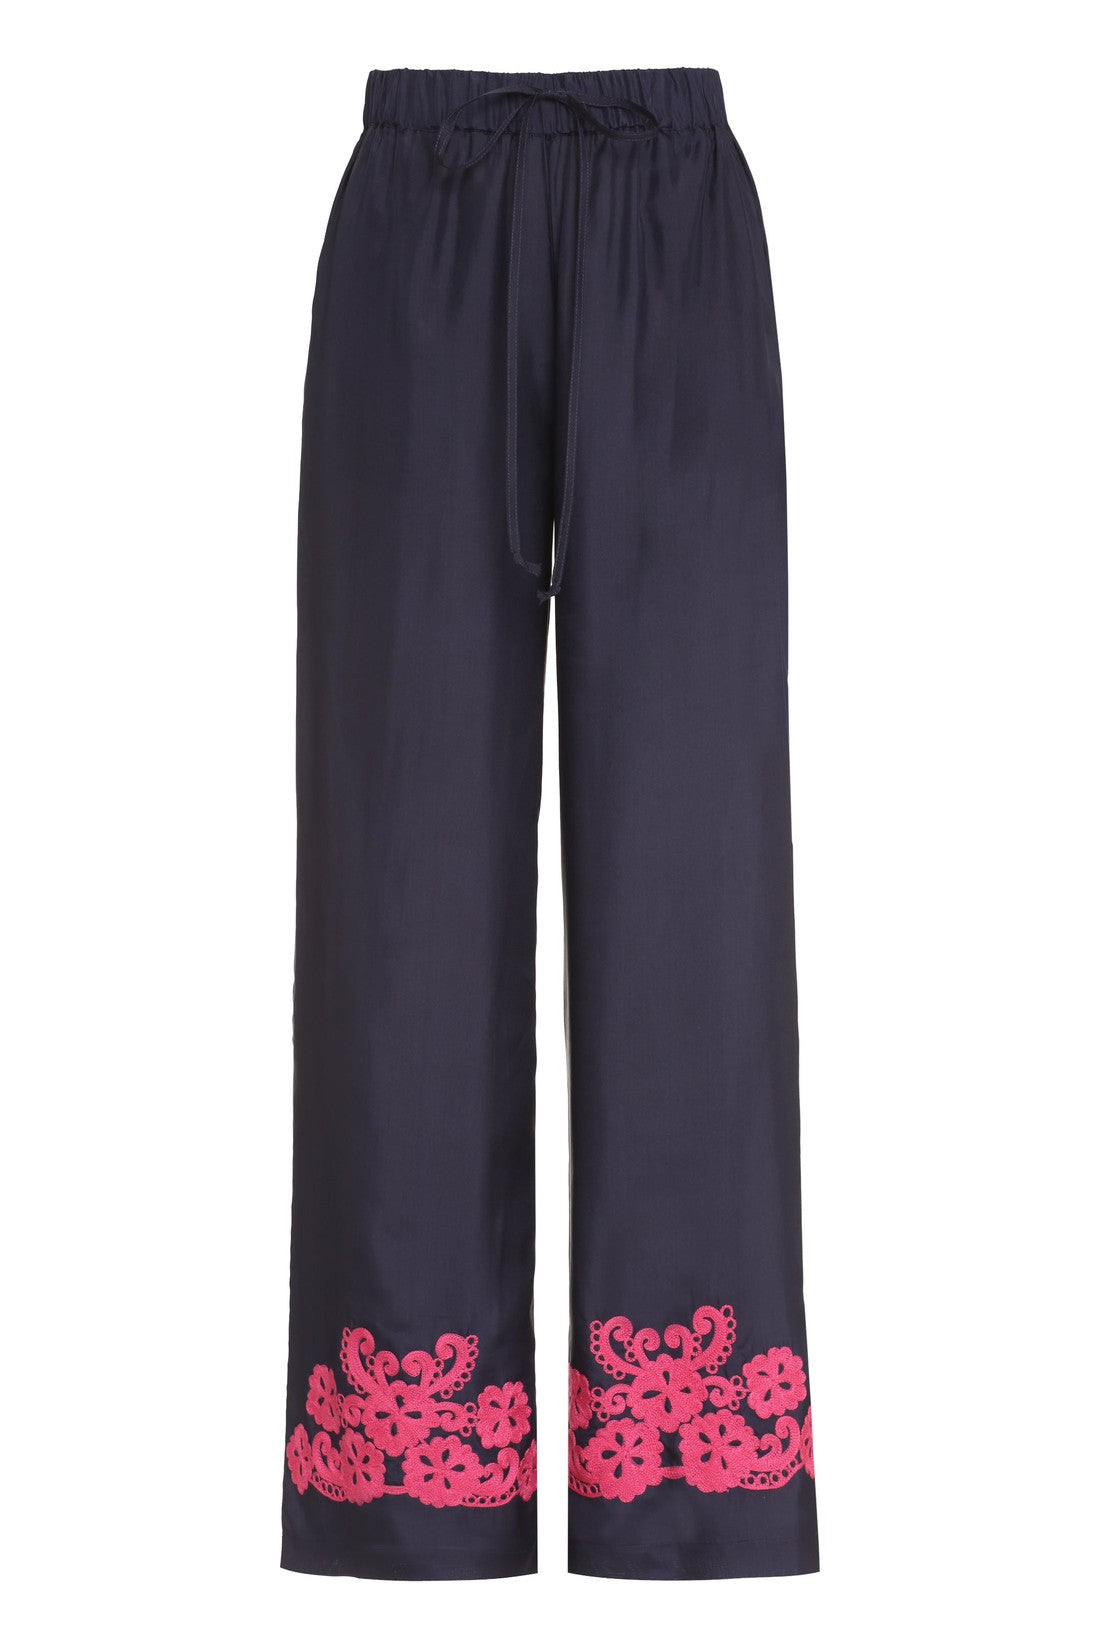 Parosh-OUTLET-SALE-Embroidered silk trousers-ARCHIVIST